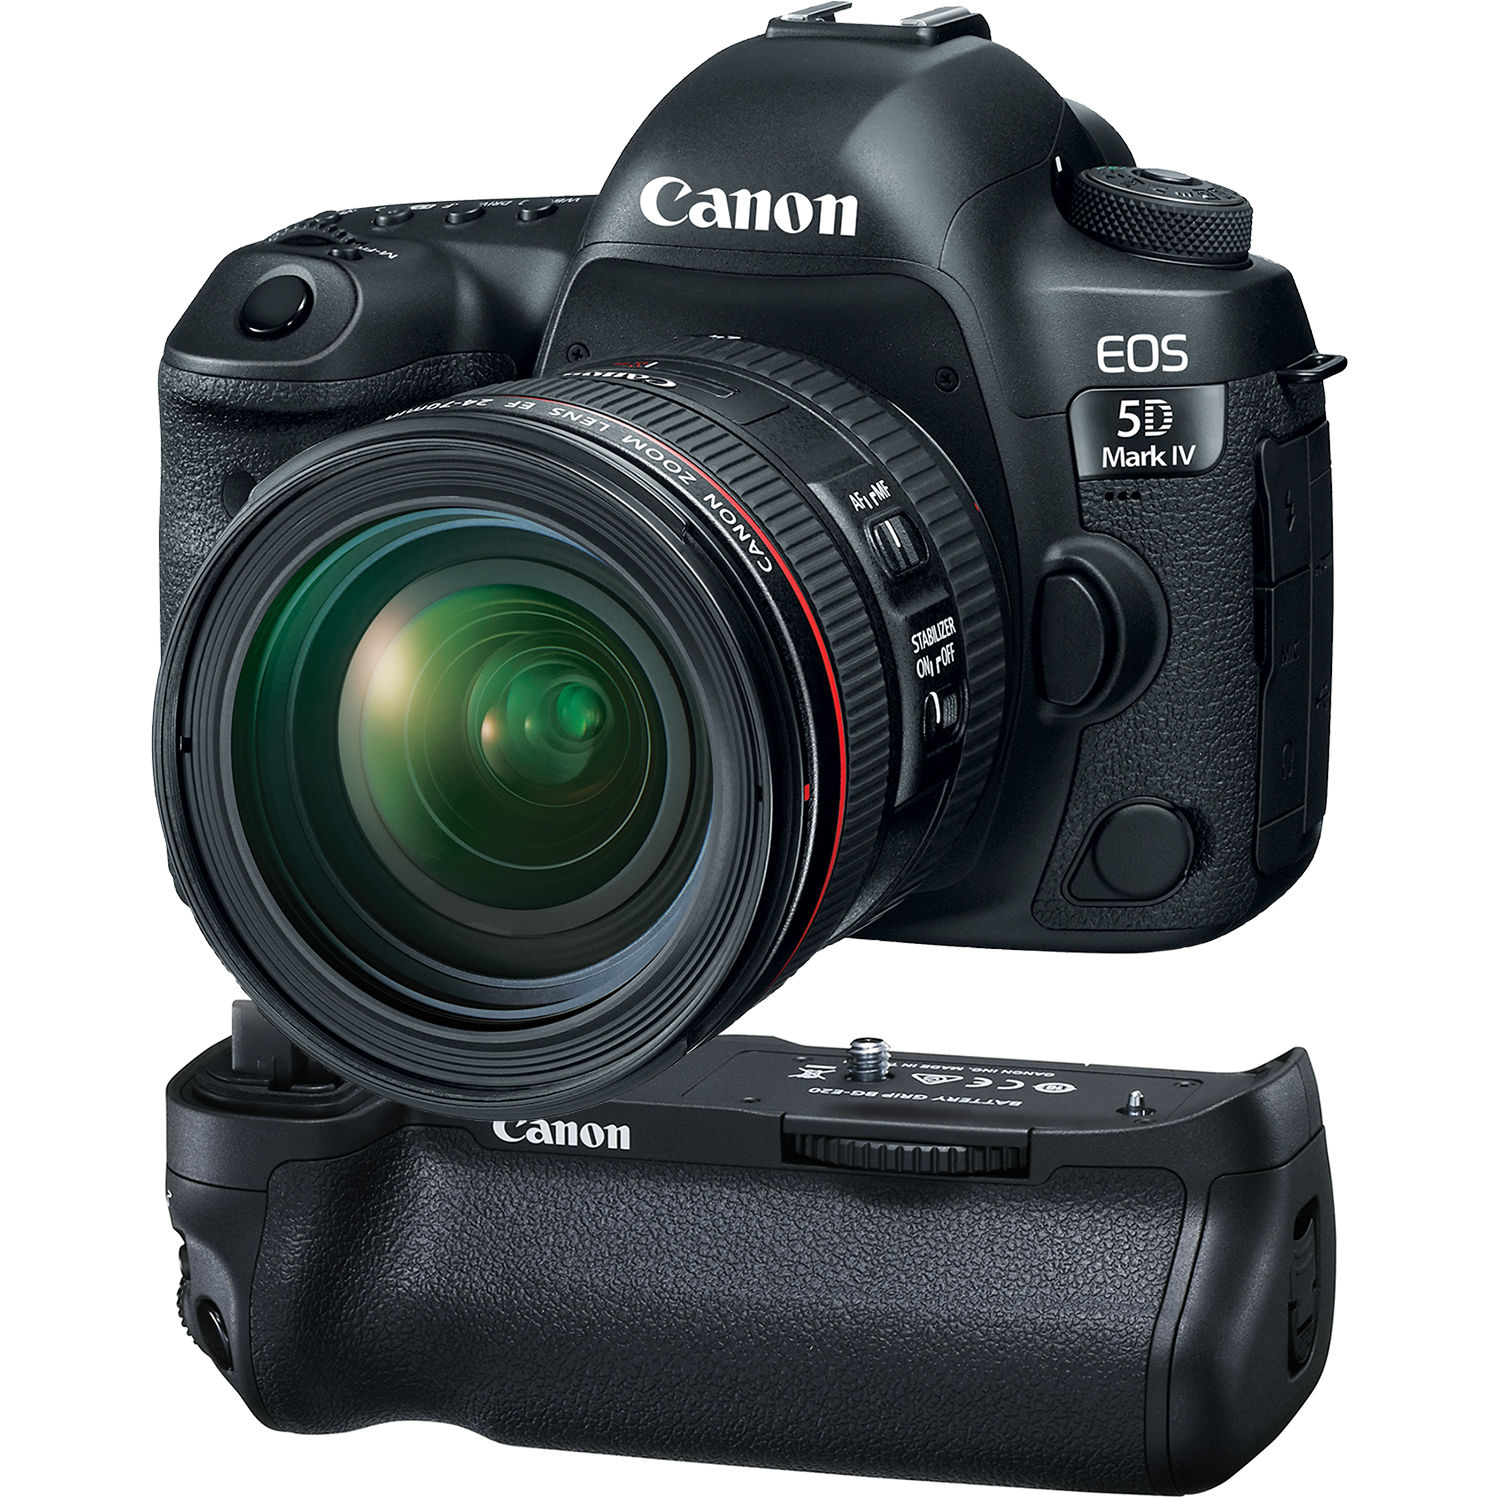 Canon EOS 5D Mark IV DSLR Camera with 24-70mm f/4L Lens 1483C018